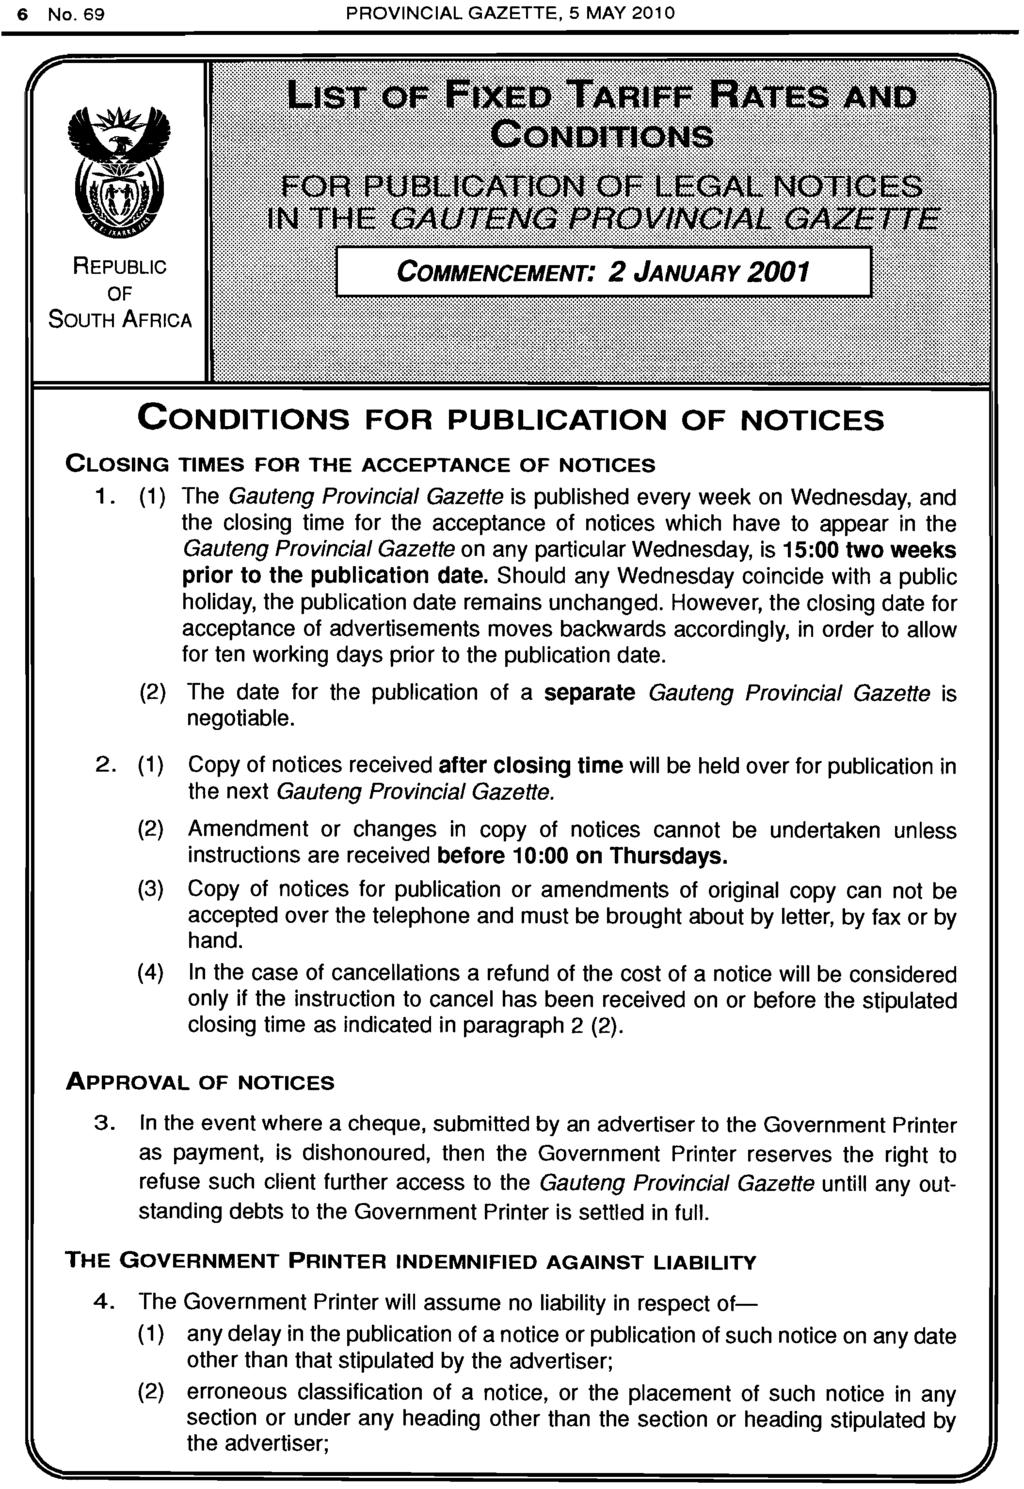 6 No. 69 PROVINCIAL GAZETTE, 5 MAY 2010 "REPUBLIC OF SOUTH AFRICA CONDITIONS FOR PUBLICATION OF NOTICES CLOSING TIMES FOR THE ACCEPTANCE OF NOTICES 1 (1) The Gauteng Provincial Gazette is published